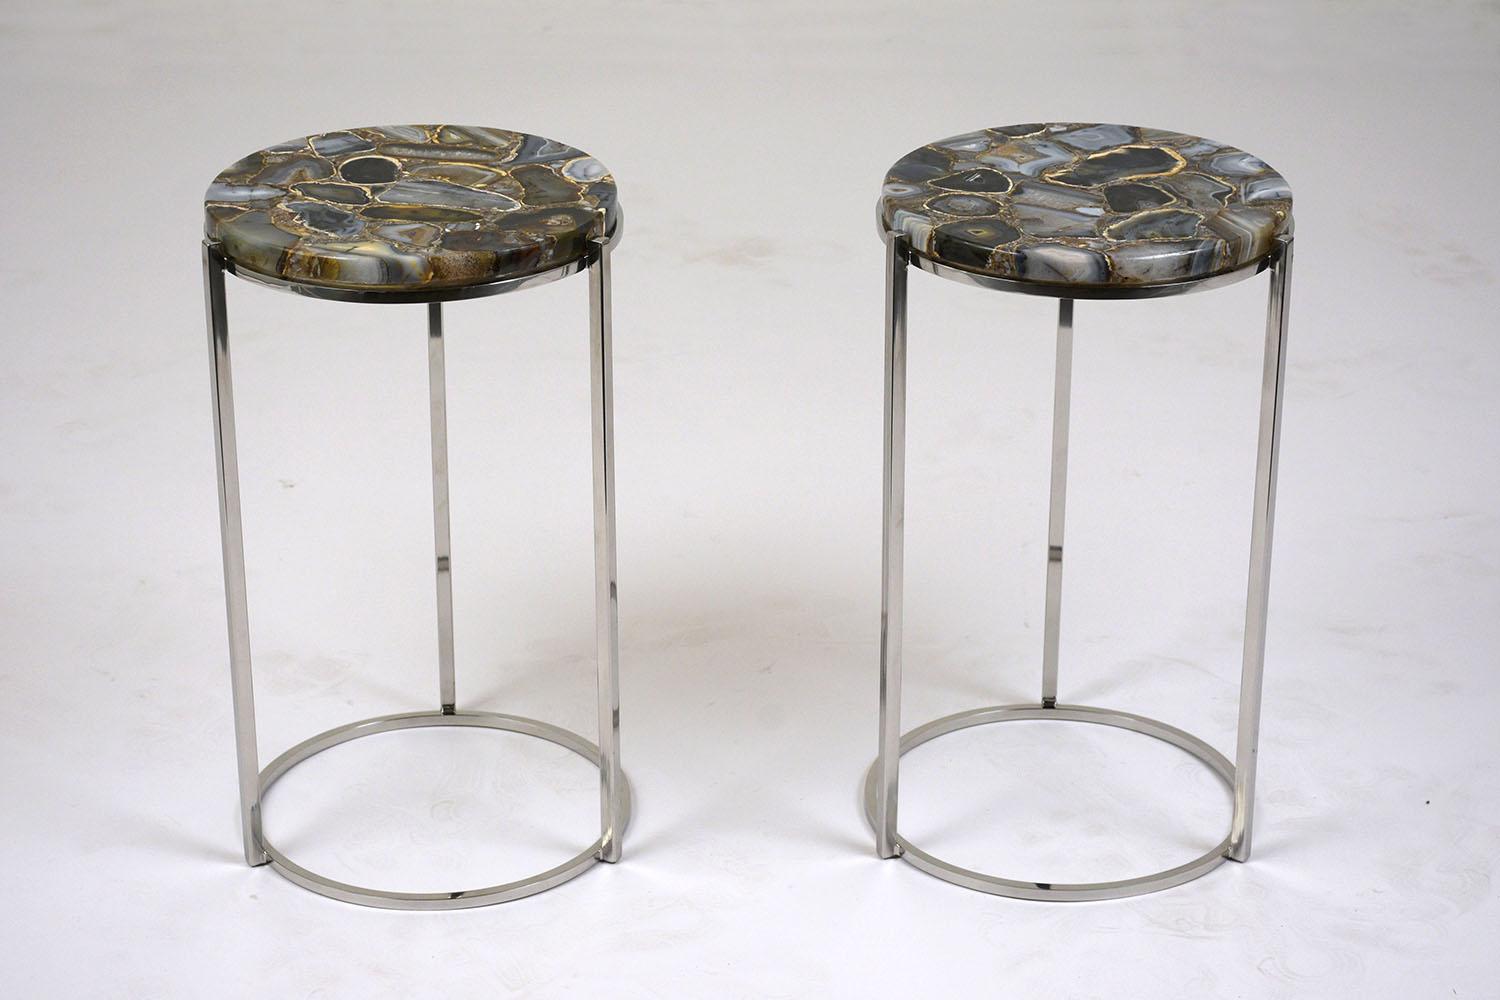 This pair of 1970s Mid-Century Modern round side table feature a chrome-plated steel frame. The top of the tables features a beautiful agate inlaid stone. This pair of side table is sturdy, stunning, and ready to be used for years to come.